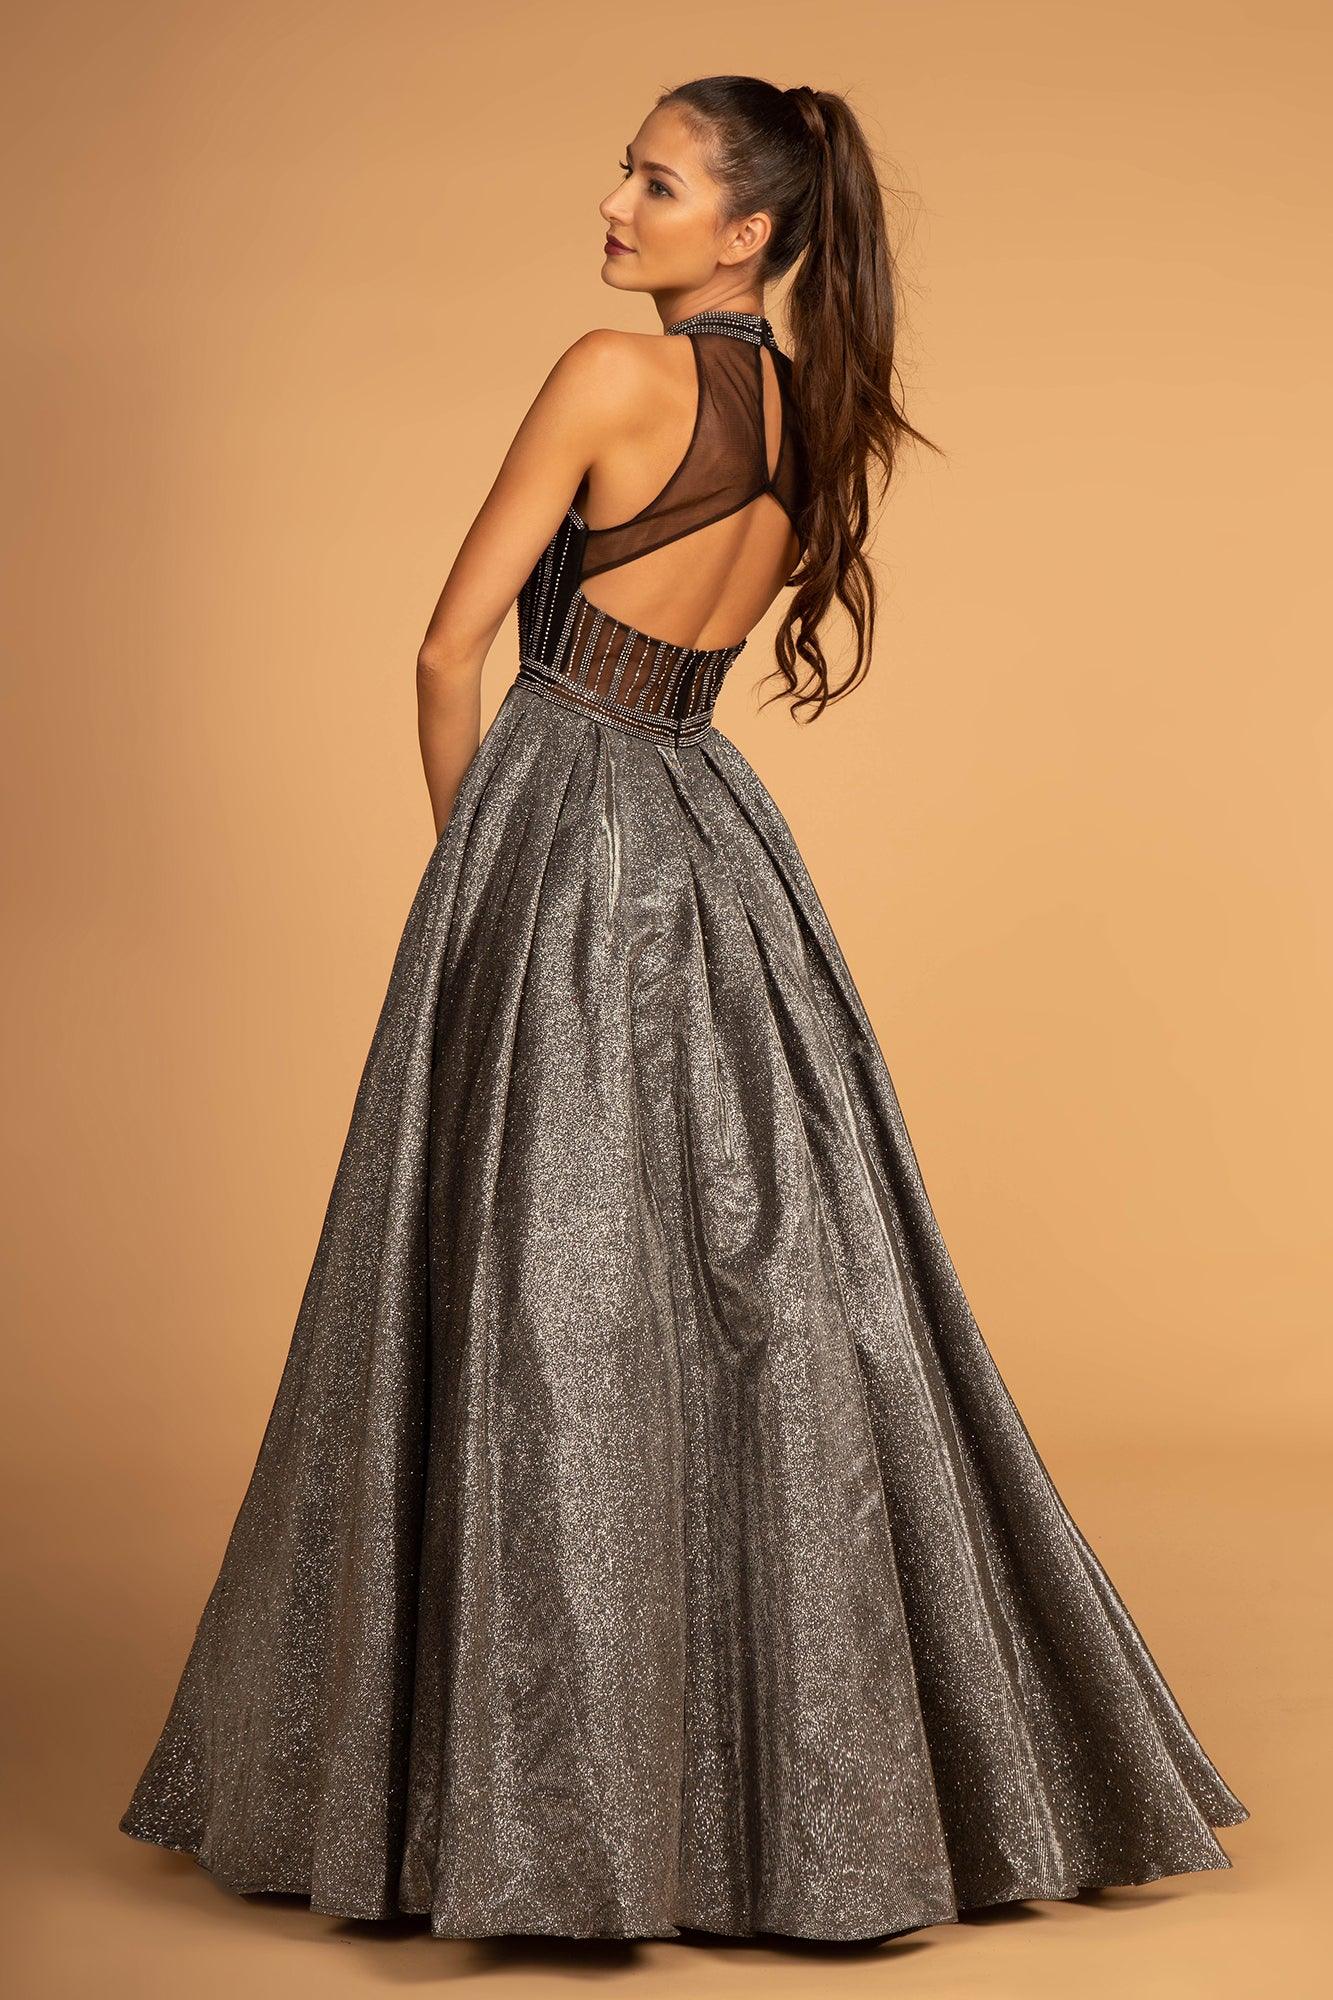 Long High Neck Prom Dress Ball Gown - The Dress Outlet Elizabeth K